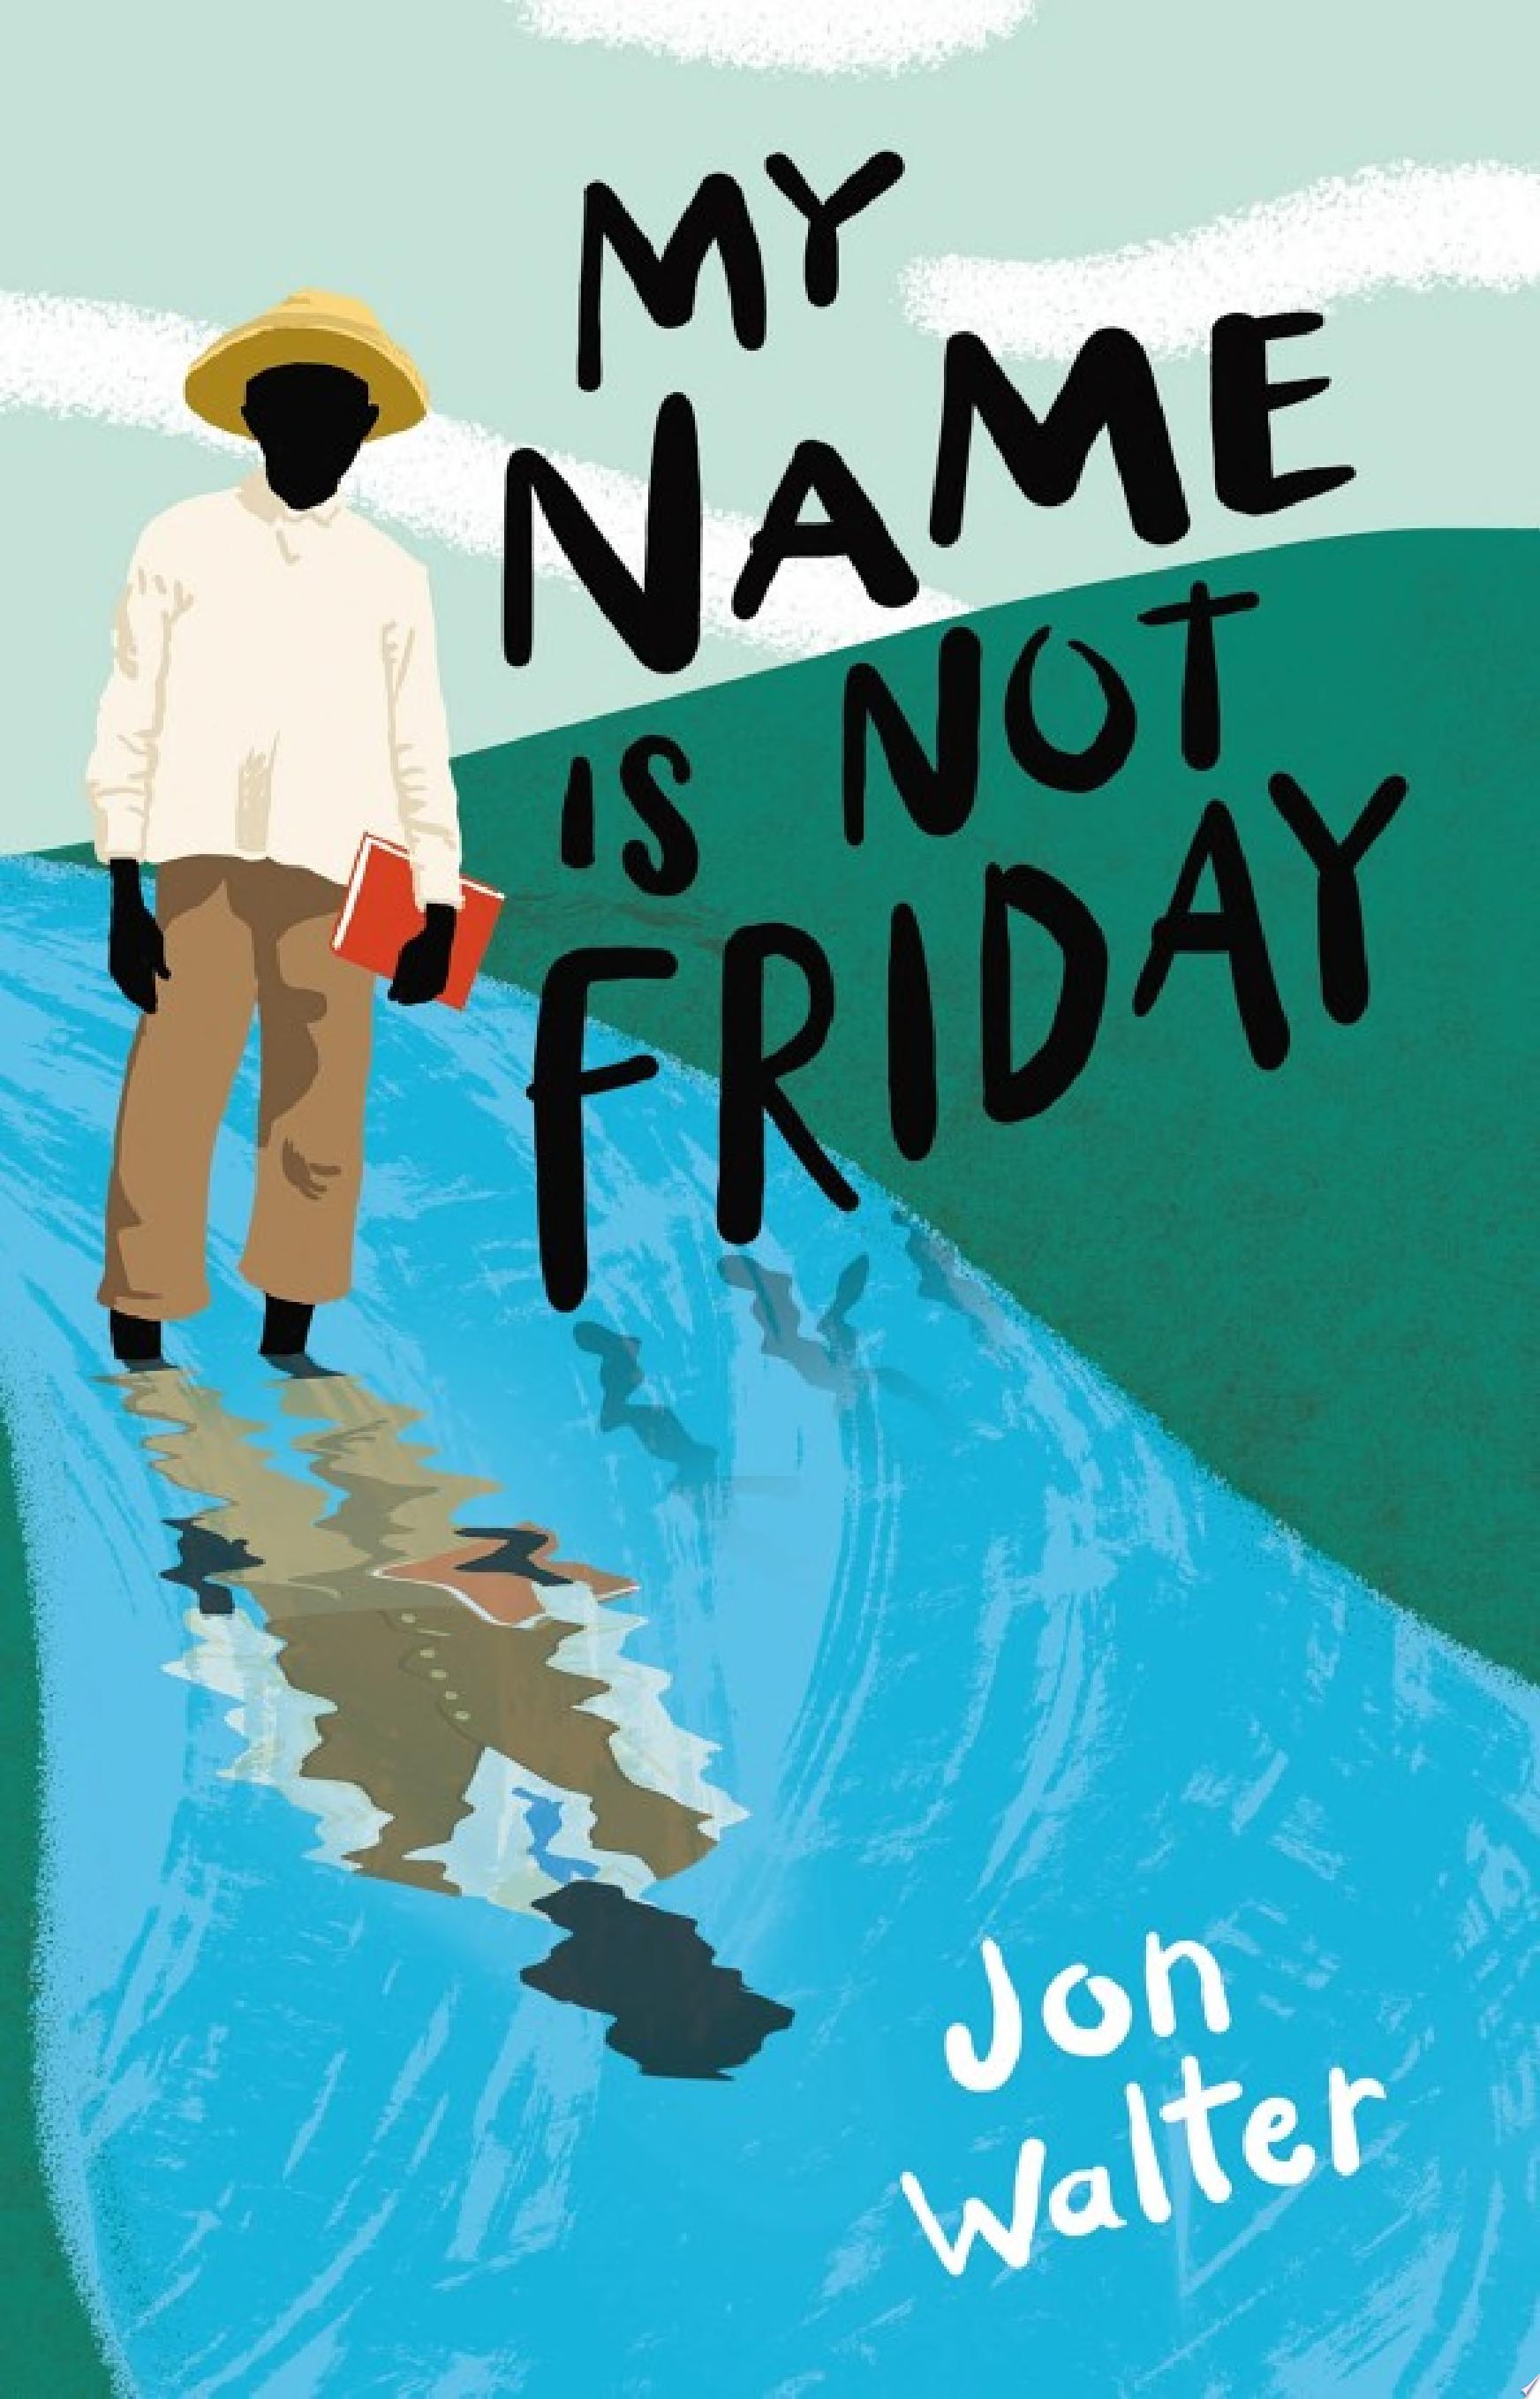 Image for "My Name is Not Friday"